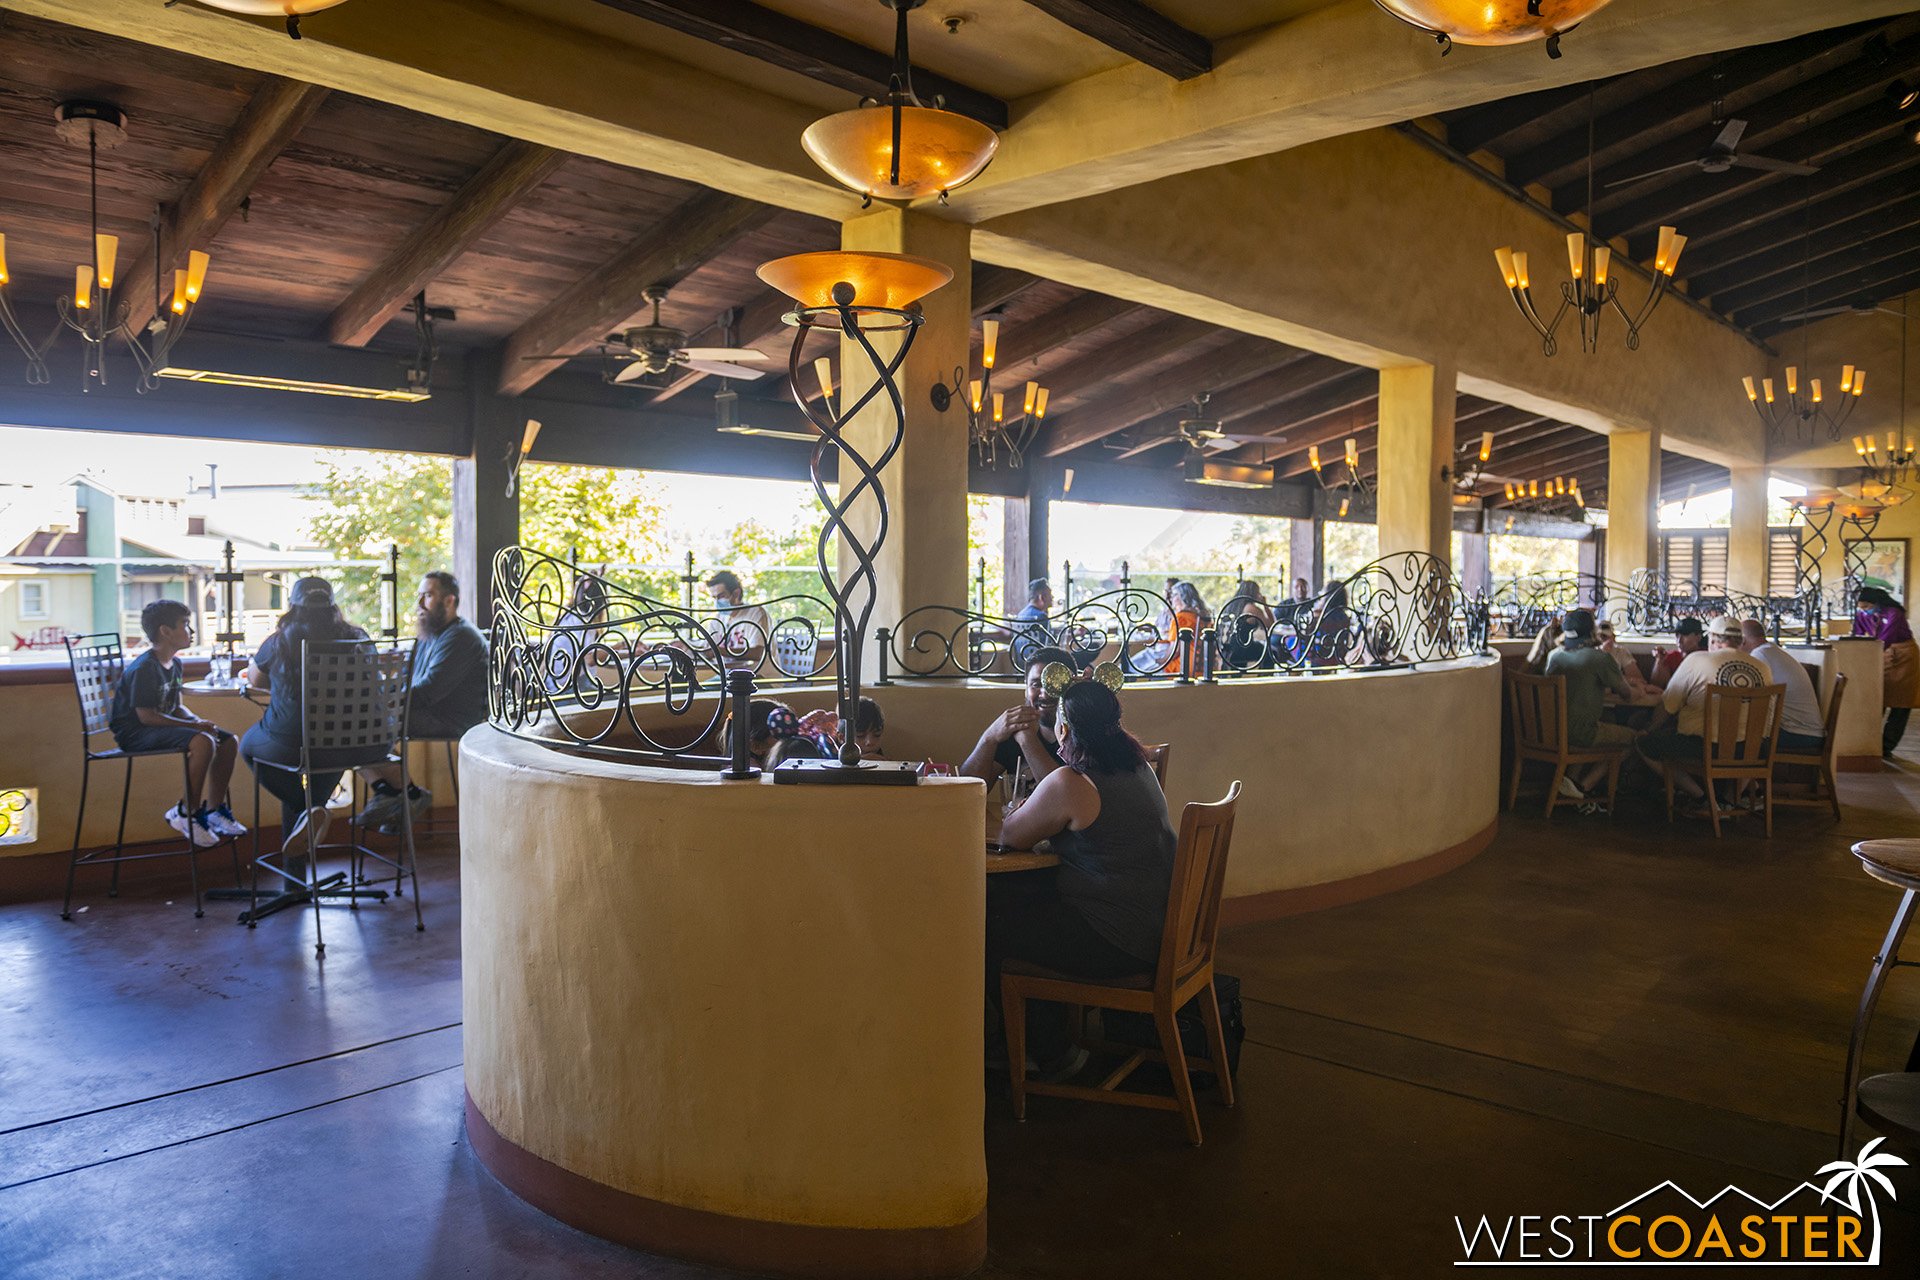  Seating facing Pacific Wharf was available on the more spacious side. 